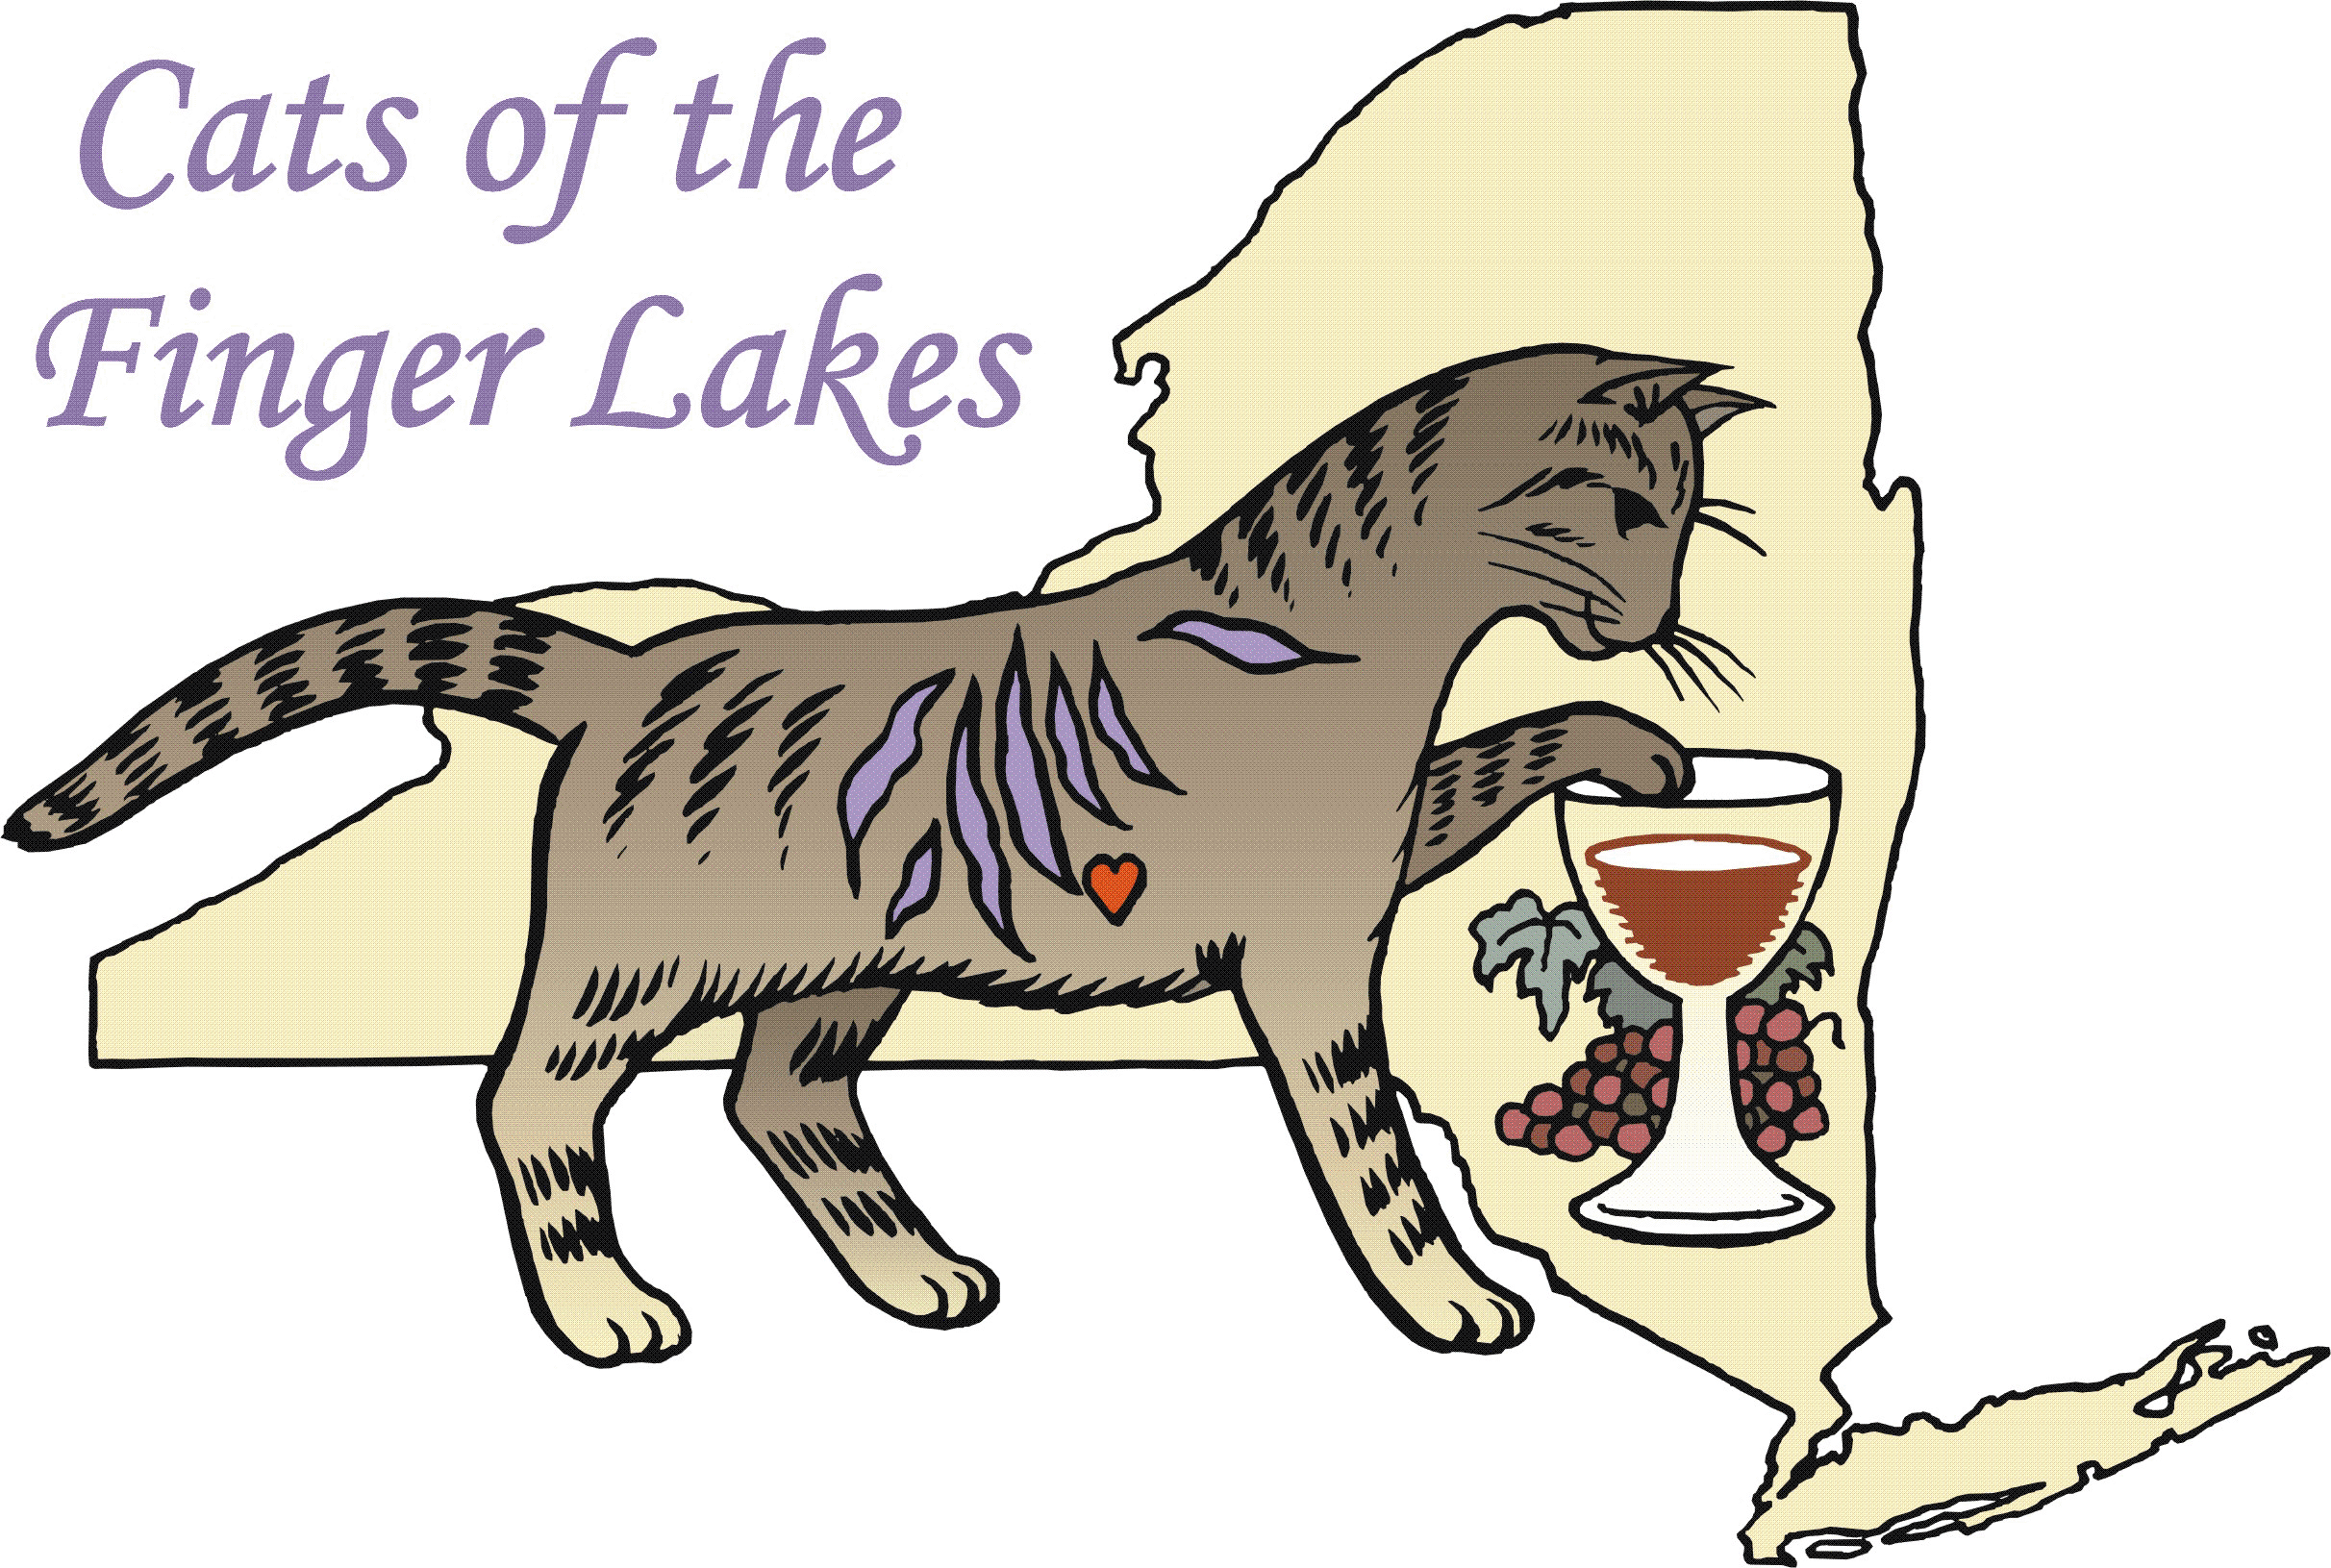 Cats of the Finger Lakes logo